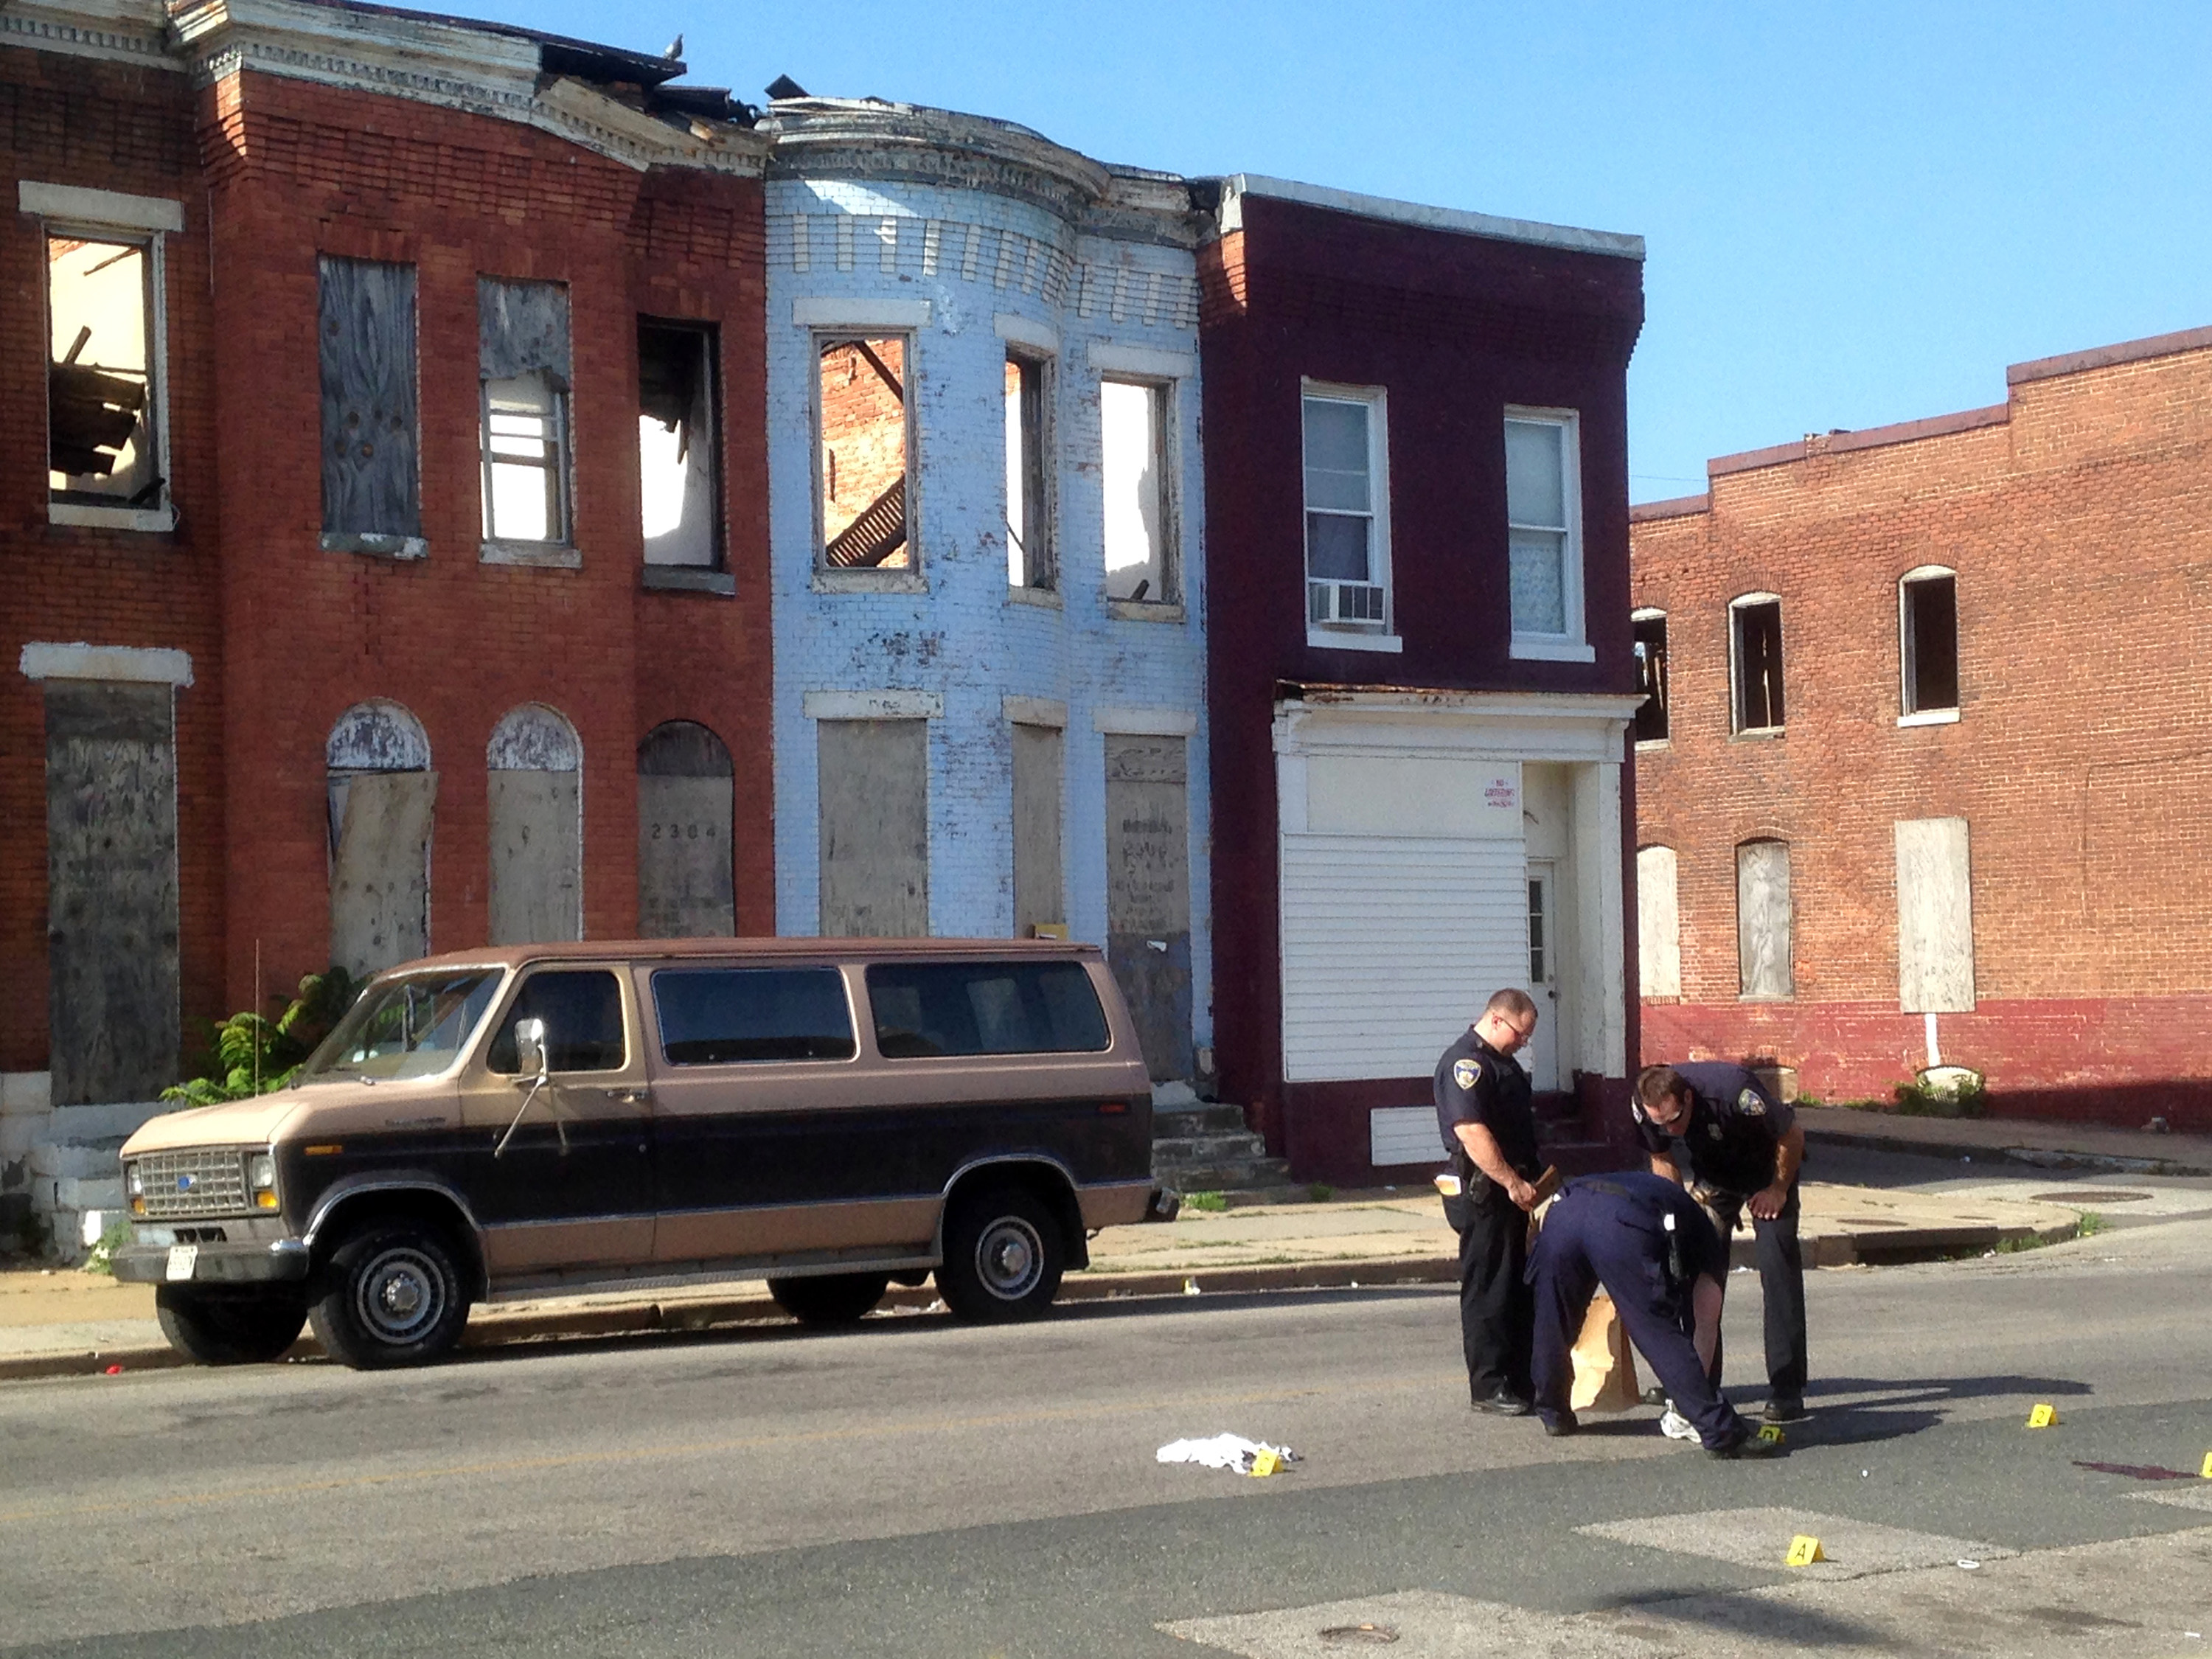 Police pick up a pair of tennis shoes after a double shooting in the 2300 block of E. Preston Street in Broadway East on May 24, 2015 in Baltimore, Md. (Colin Campbell—Baltimore Sun/Getty Images)